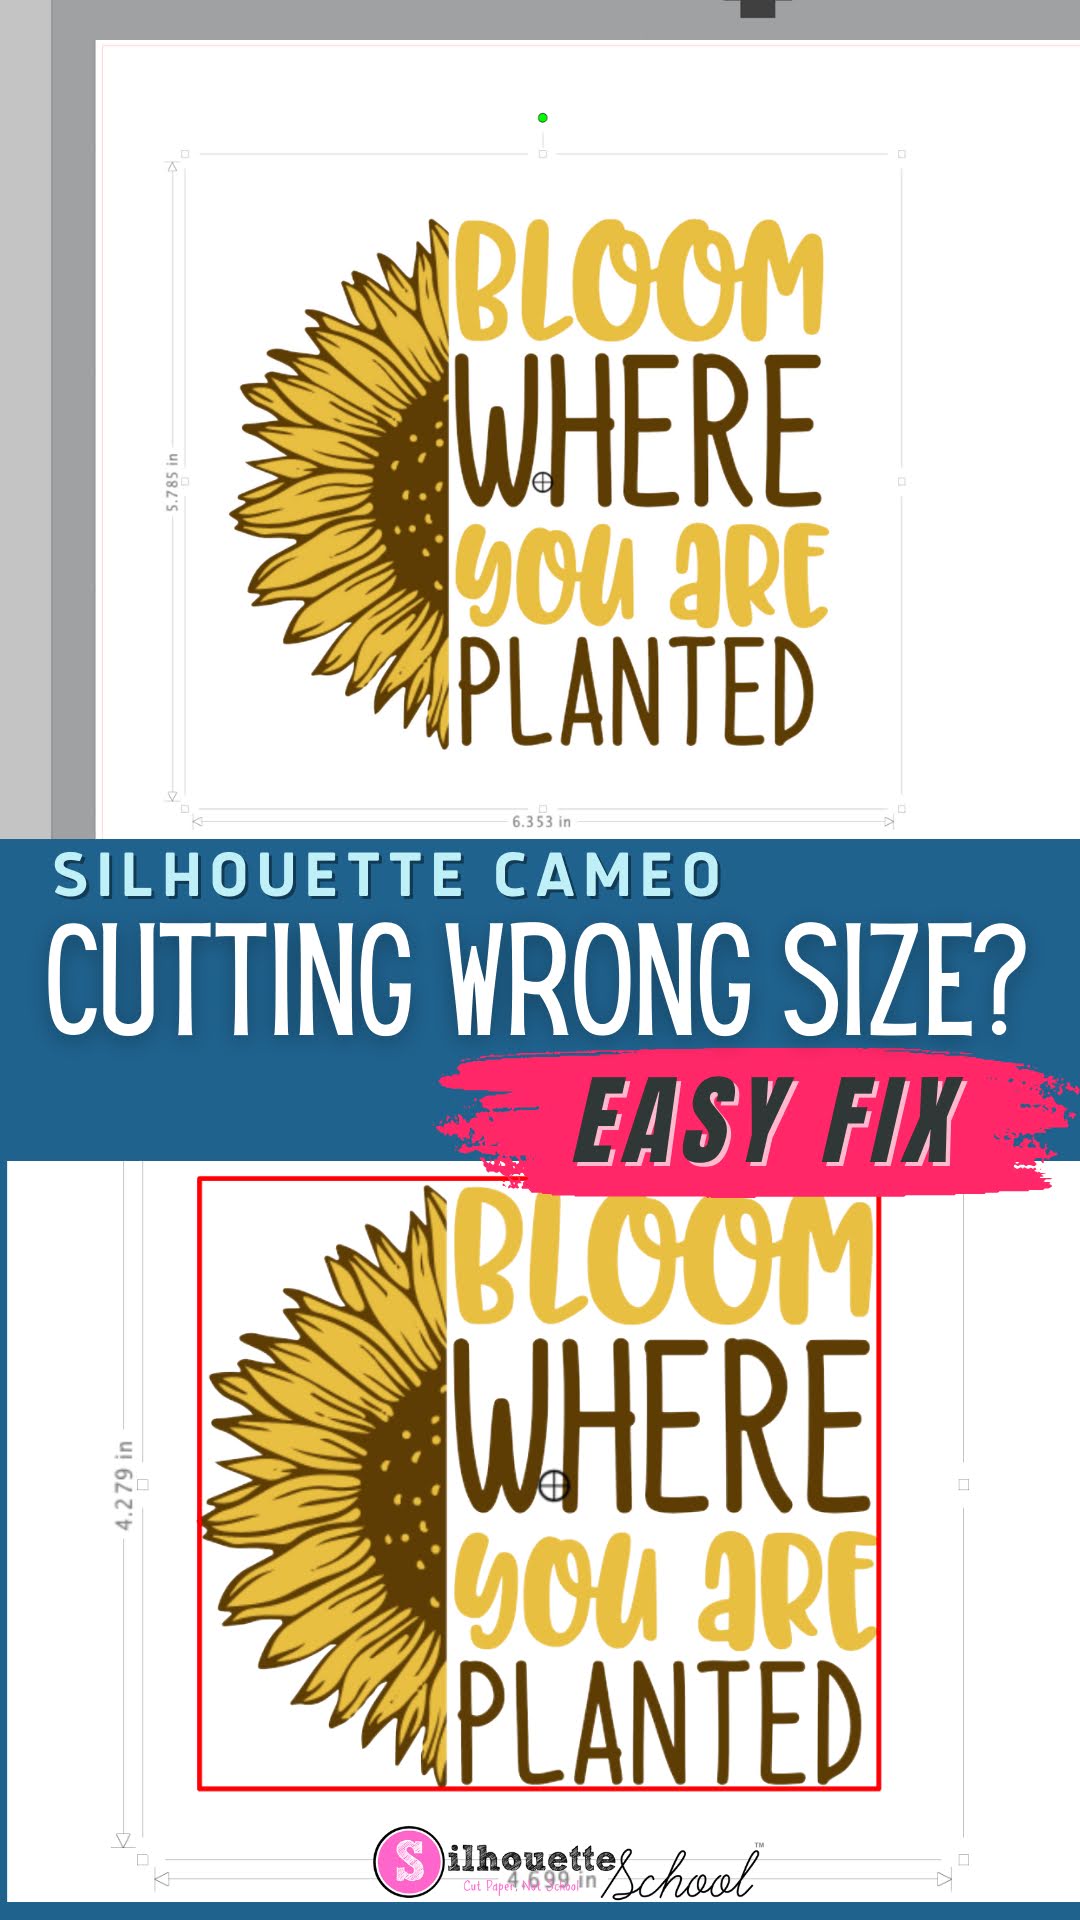 Getting Started with a Silhouette Cameo - Burton Avenue